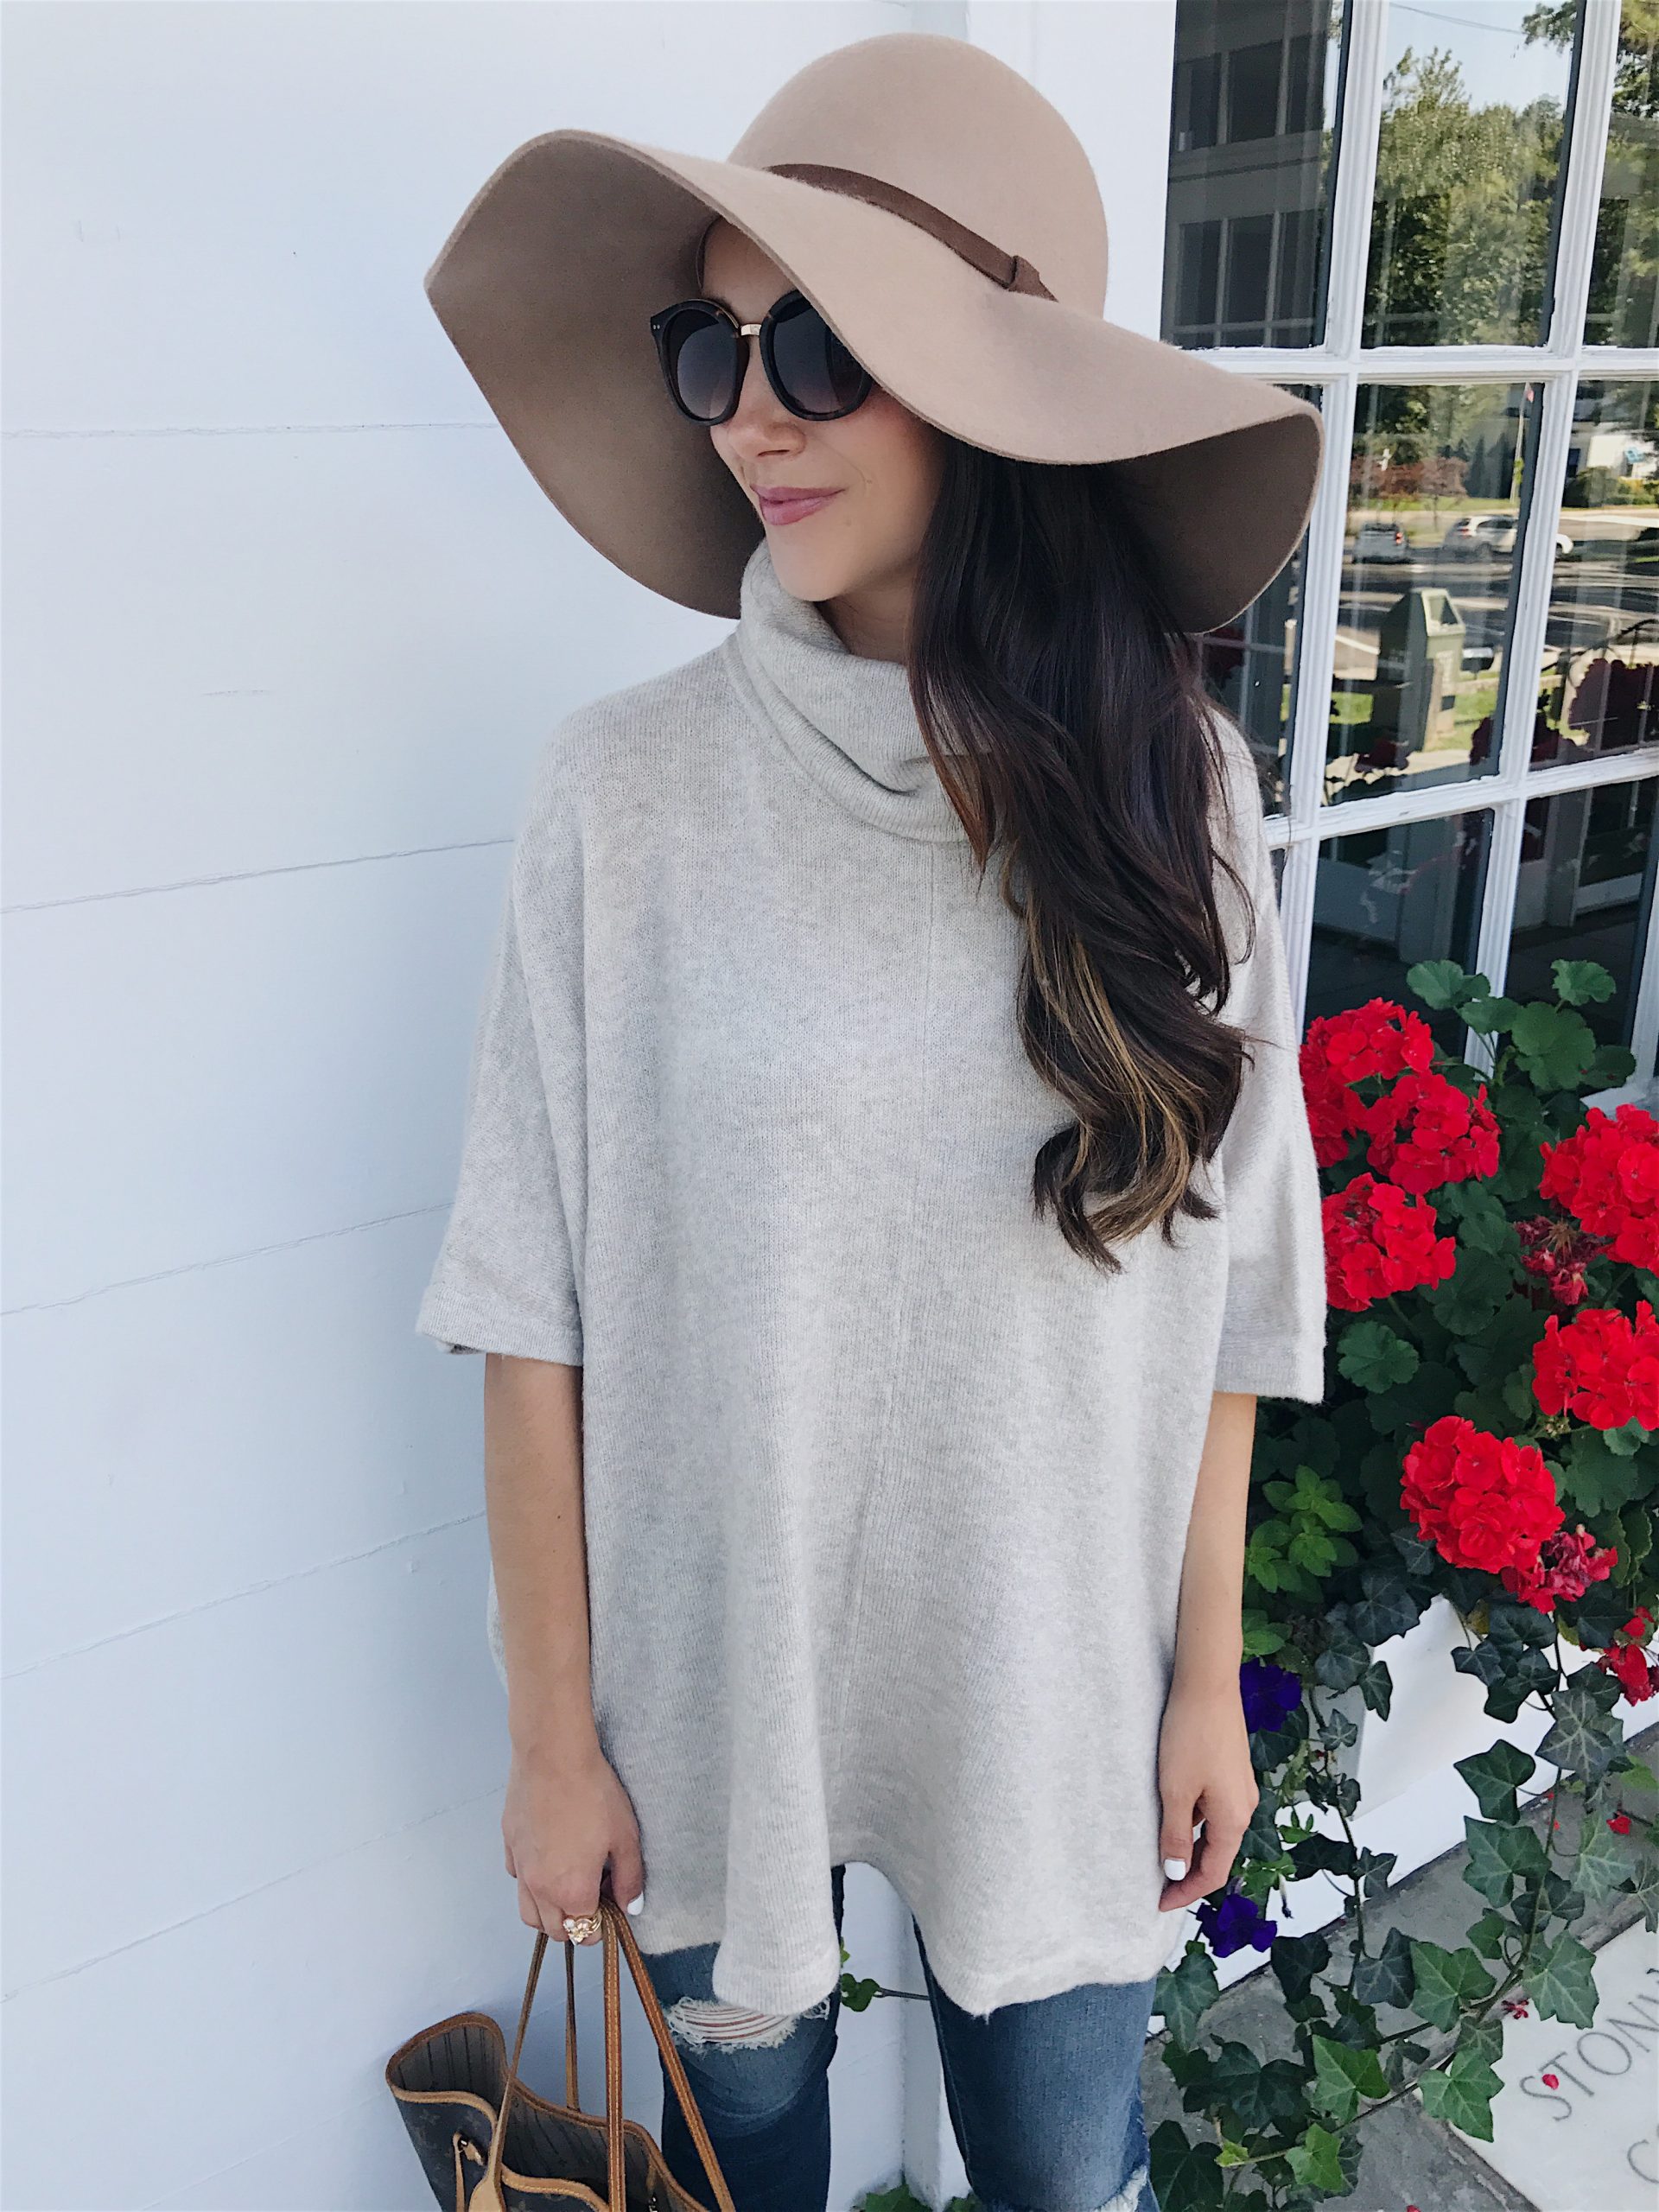 blogger Anna Monteiro of Blushing Rose Style wearing cute fall outfit sweater poncho, floppy hat and ankle brown booties